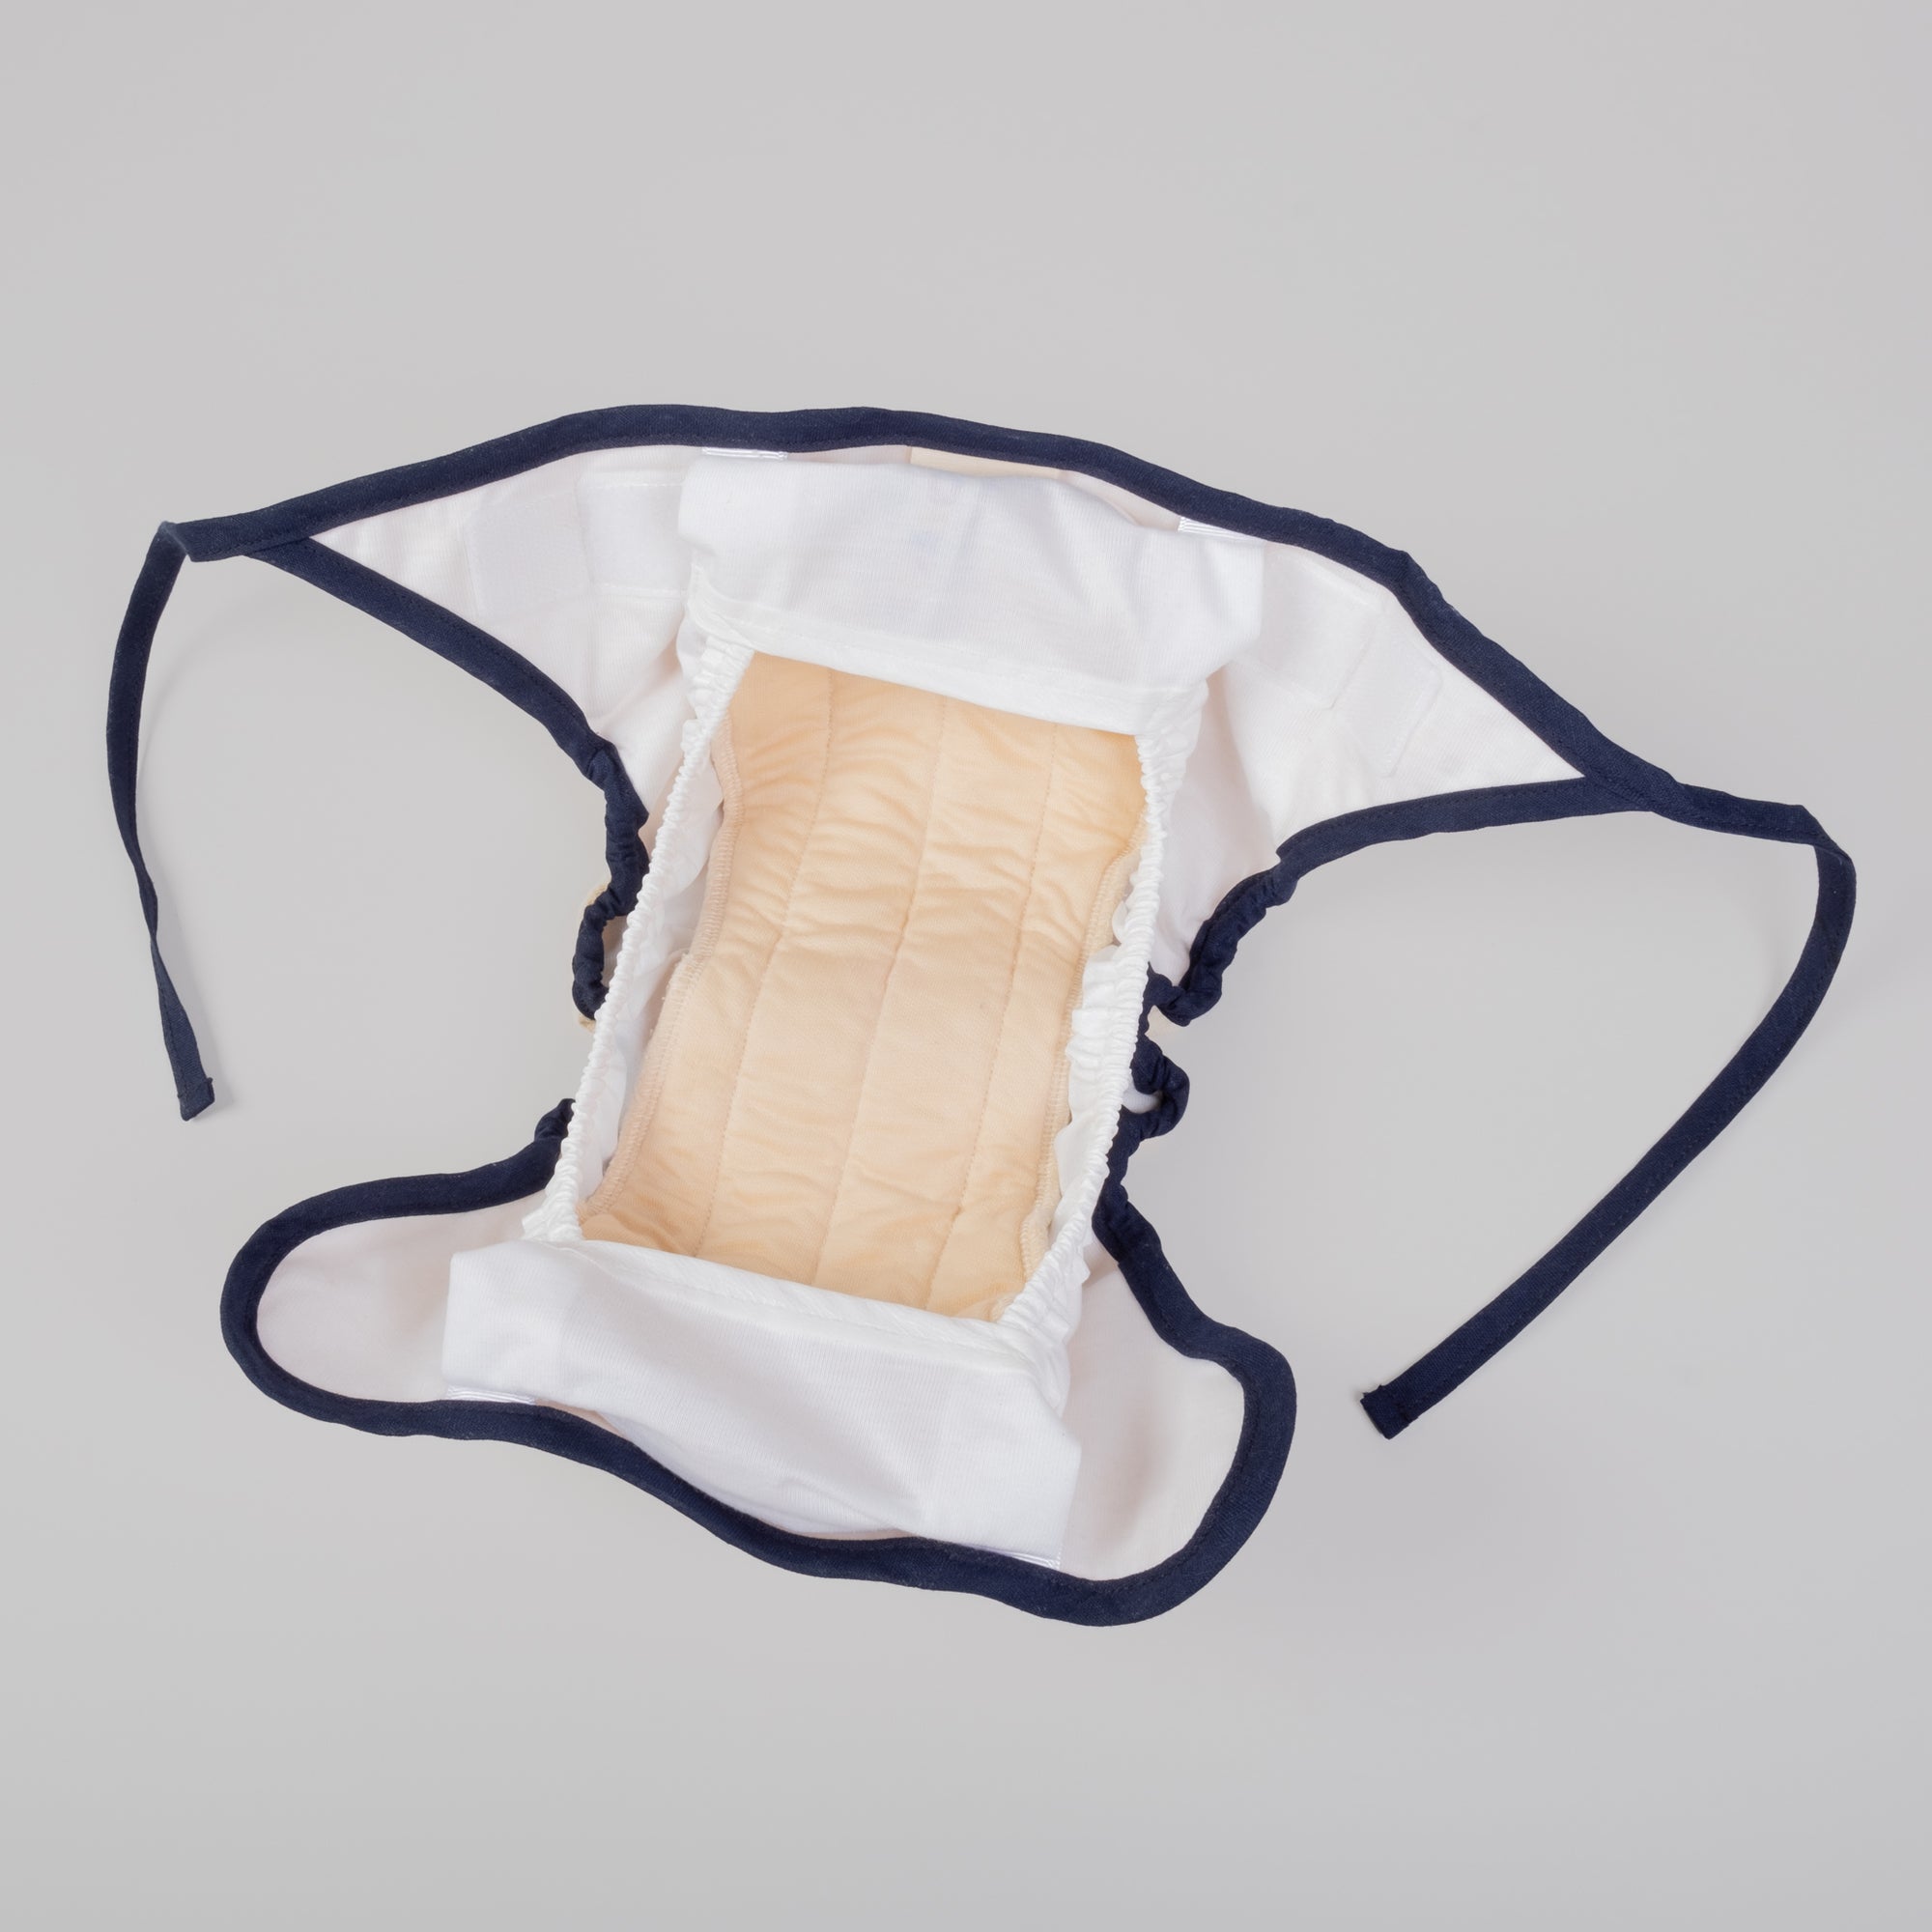 Ufo absorbent diaper inlay